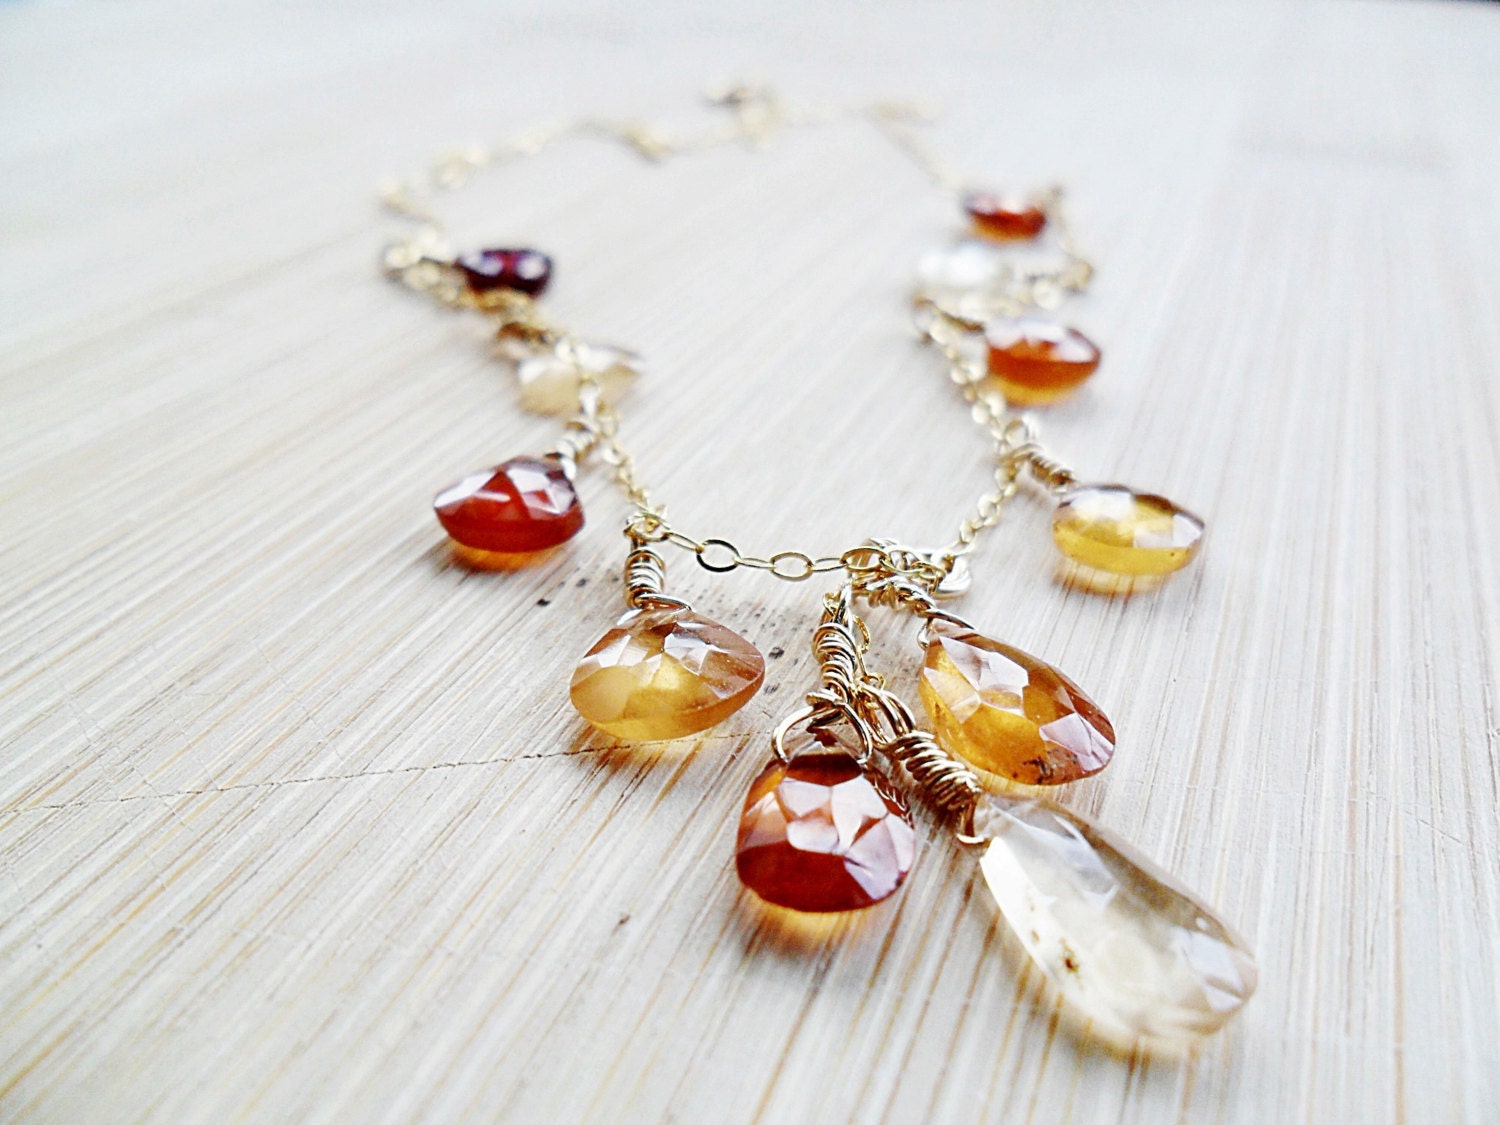 ONLY ONE Hessonite Garnet Necklace, Fall Necklace of Red, Orange, Yellow and Amber Gemstones on 14kt gold fill - Autumn Leaves